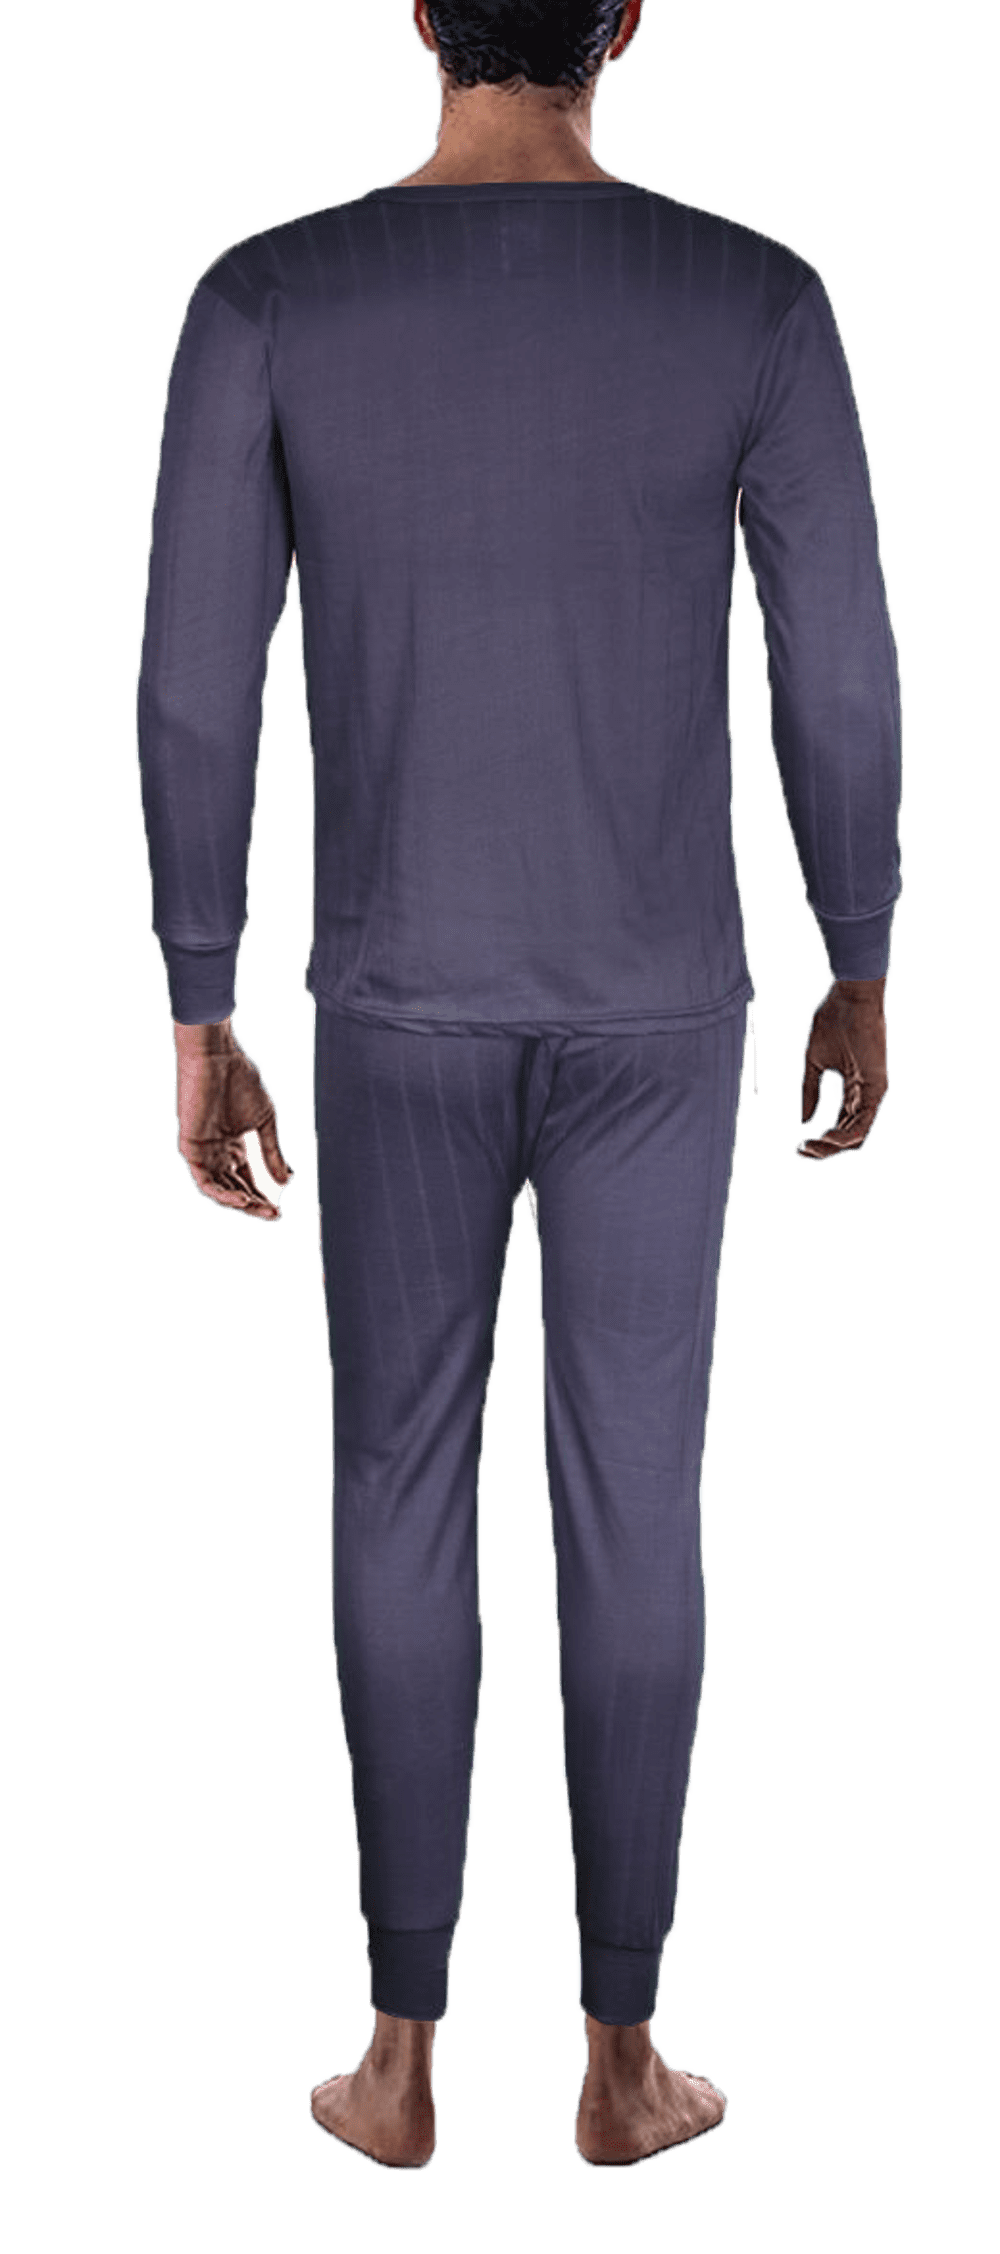 Therma Tek 2 pc Thermal Set for Men Cotton Fleece Lined Size Large